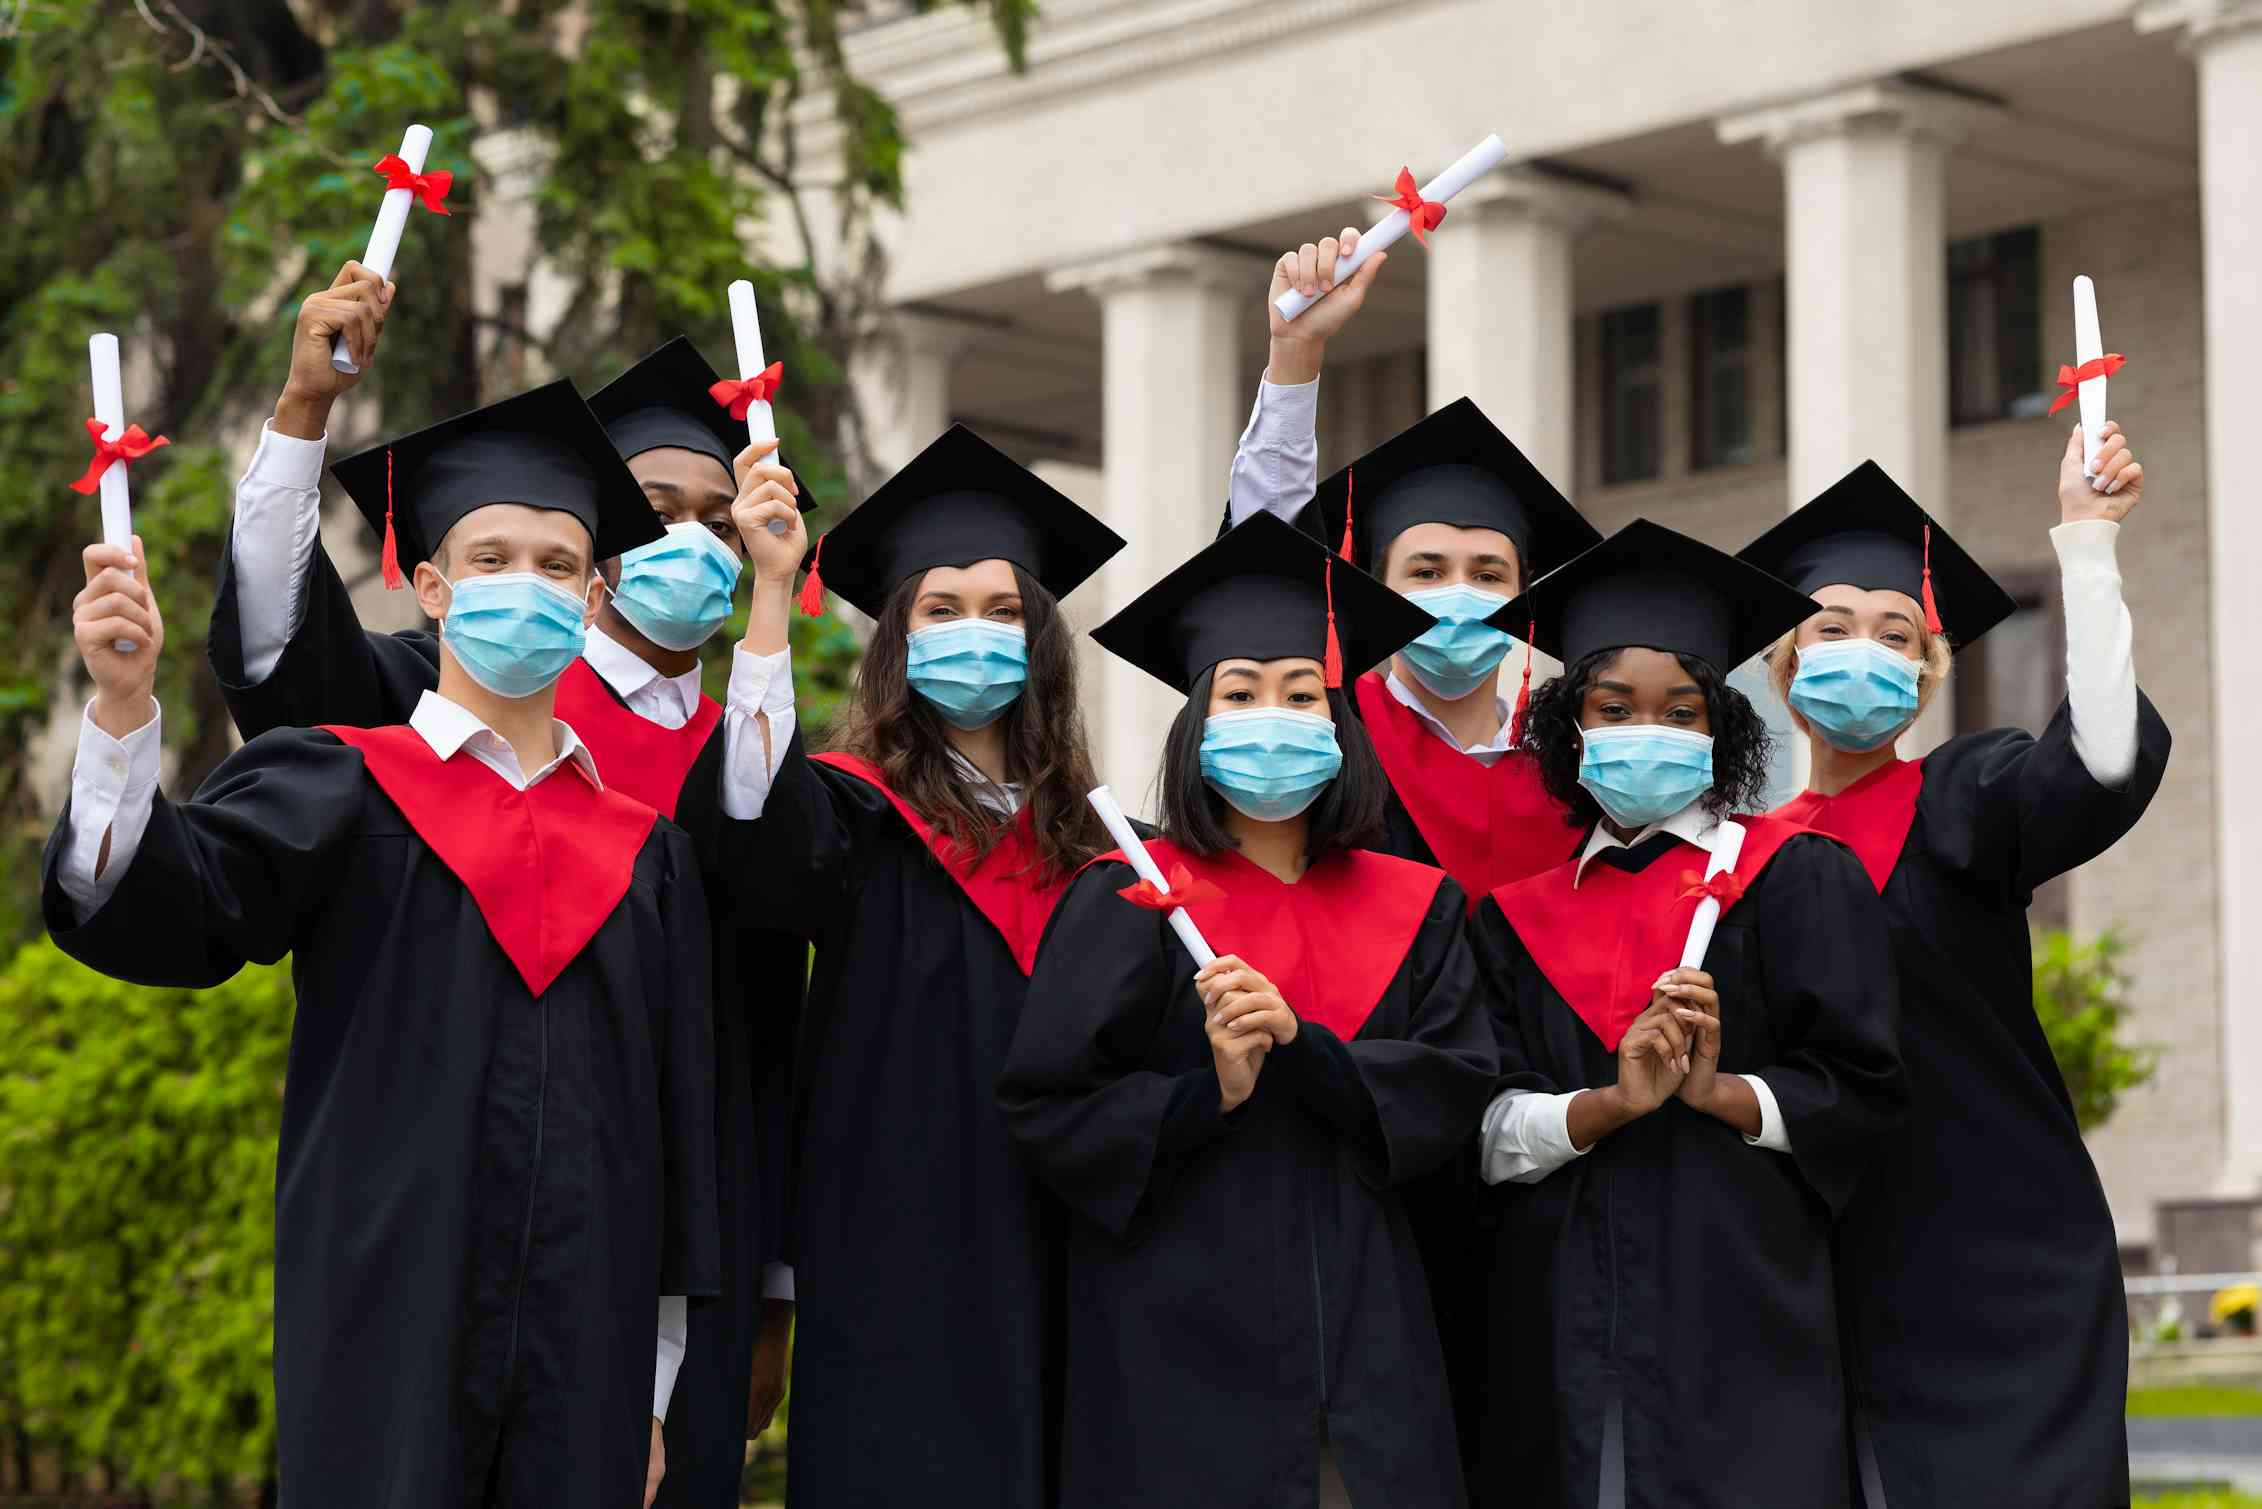 A group of graduates standing with diplomas wearing face masks.